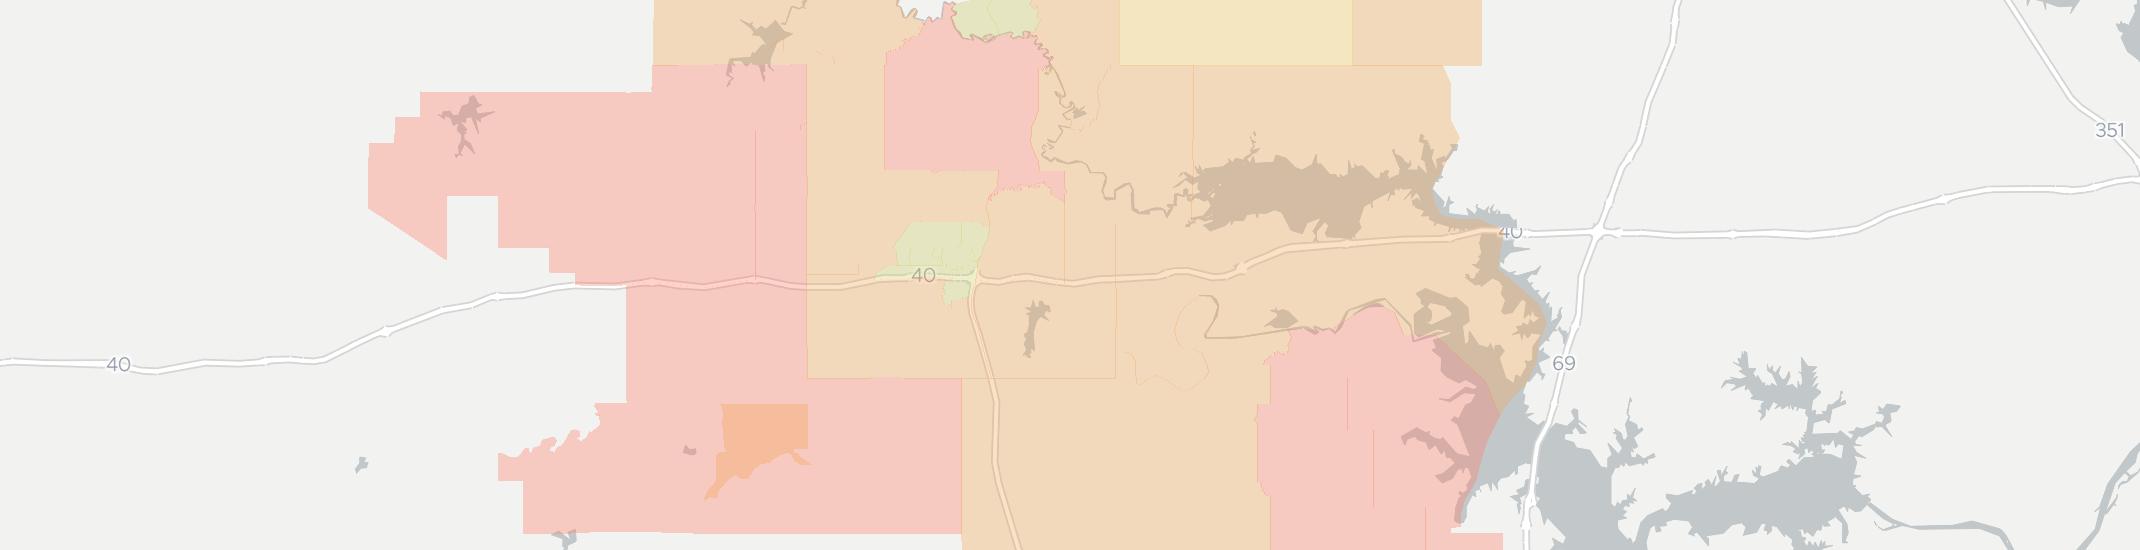 Henryetta Internet Competition Map. Click for interactive map.